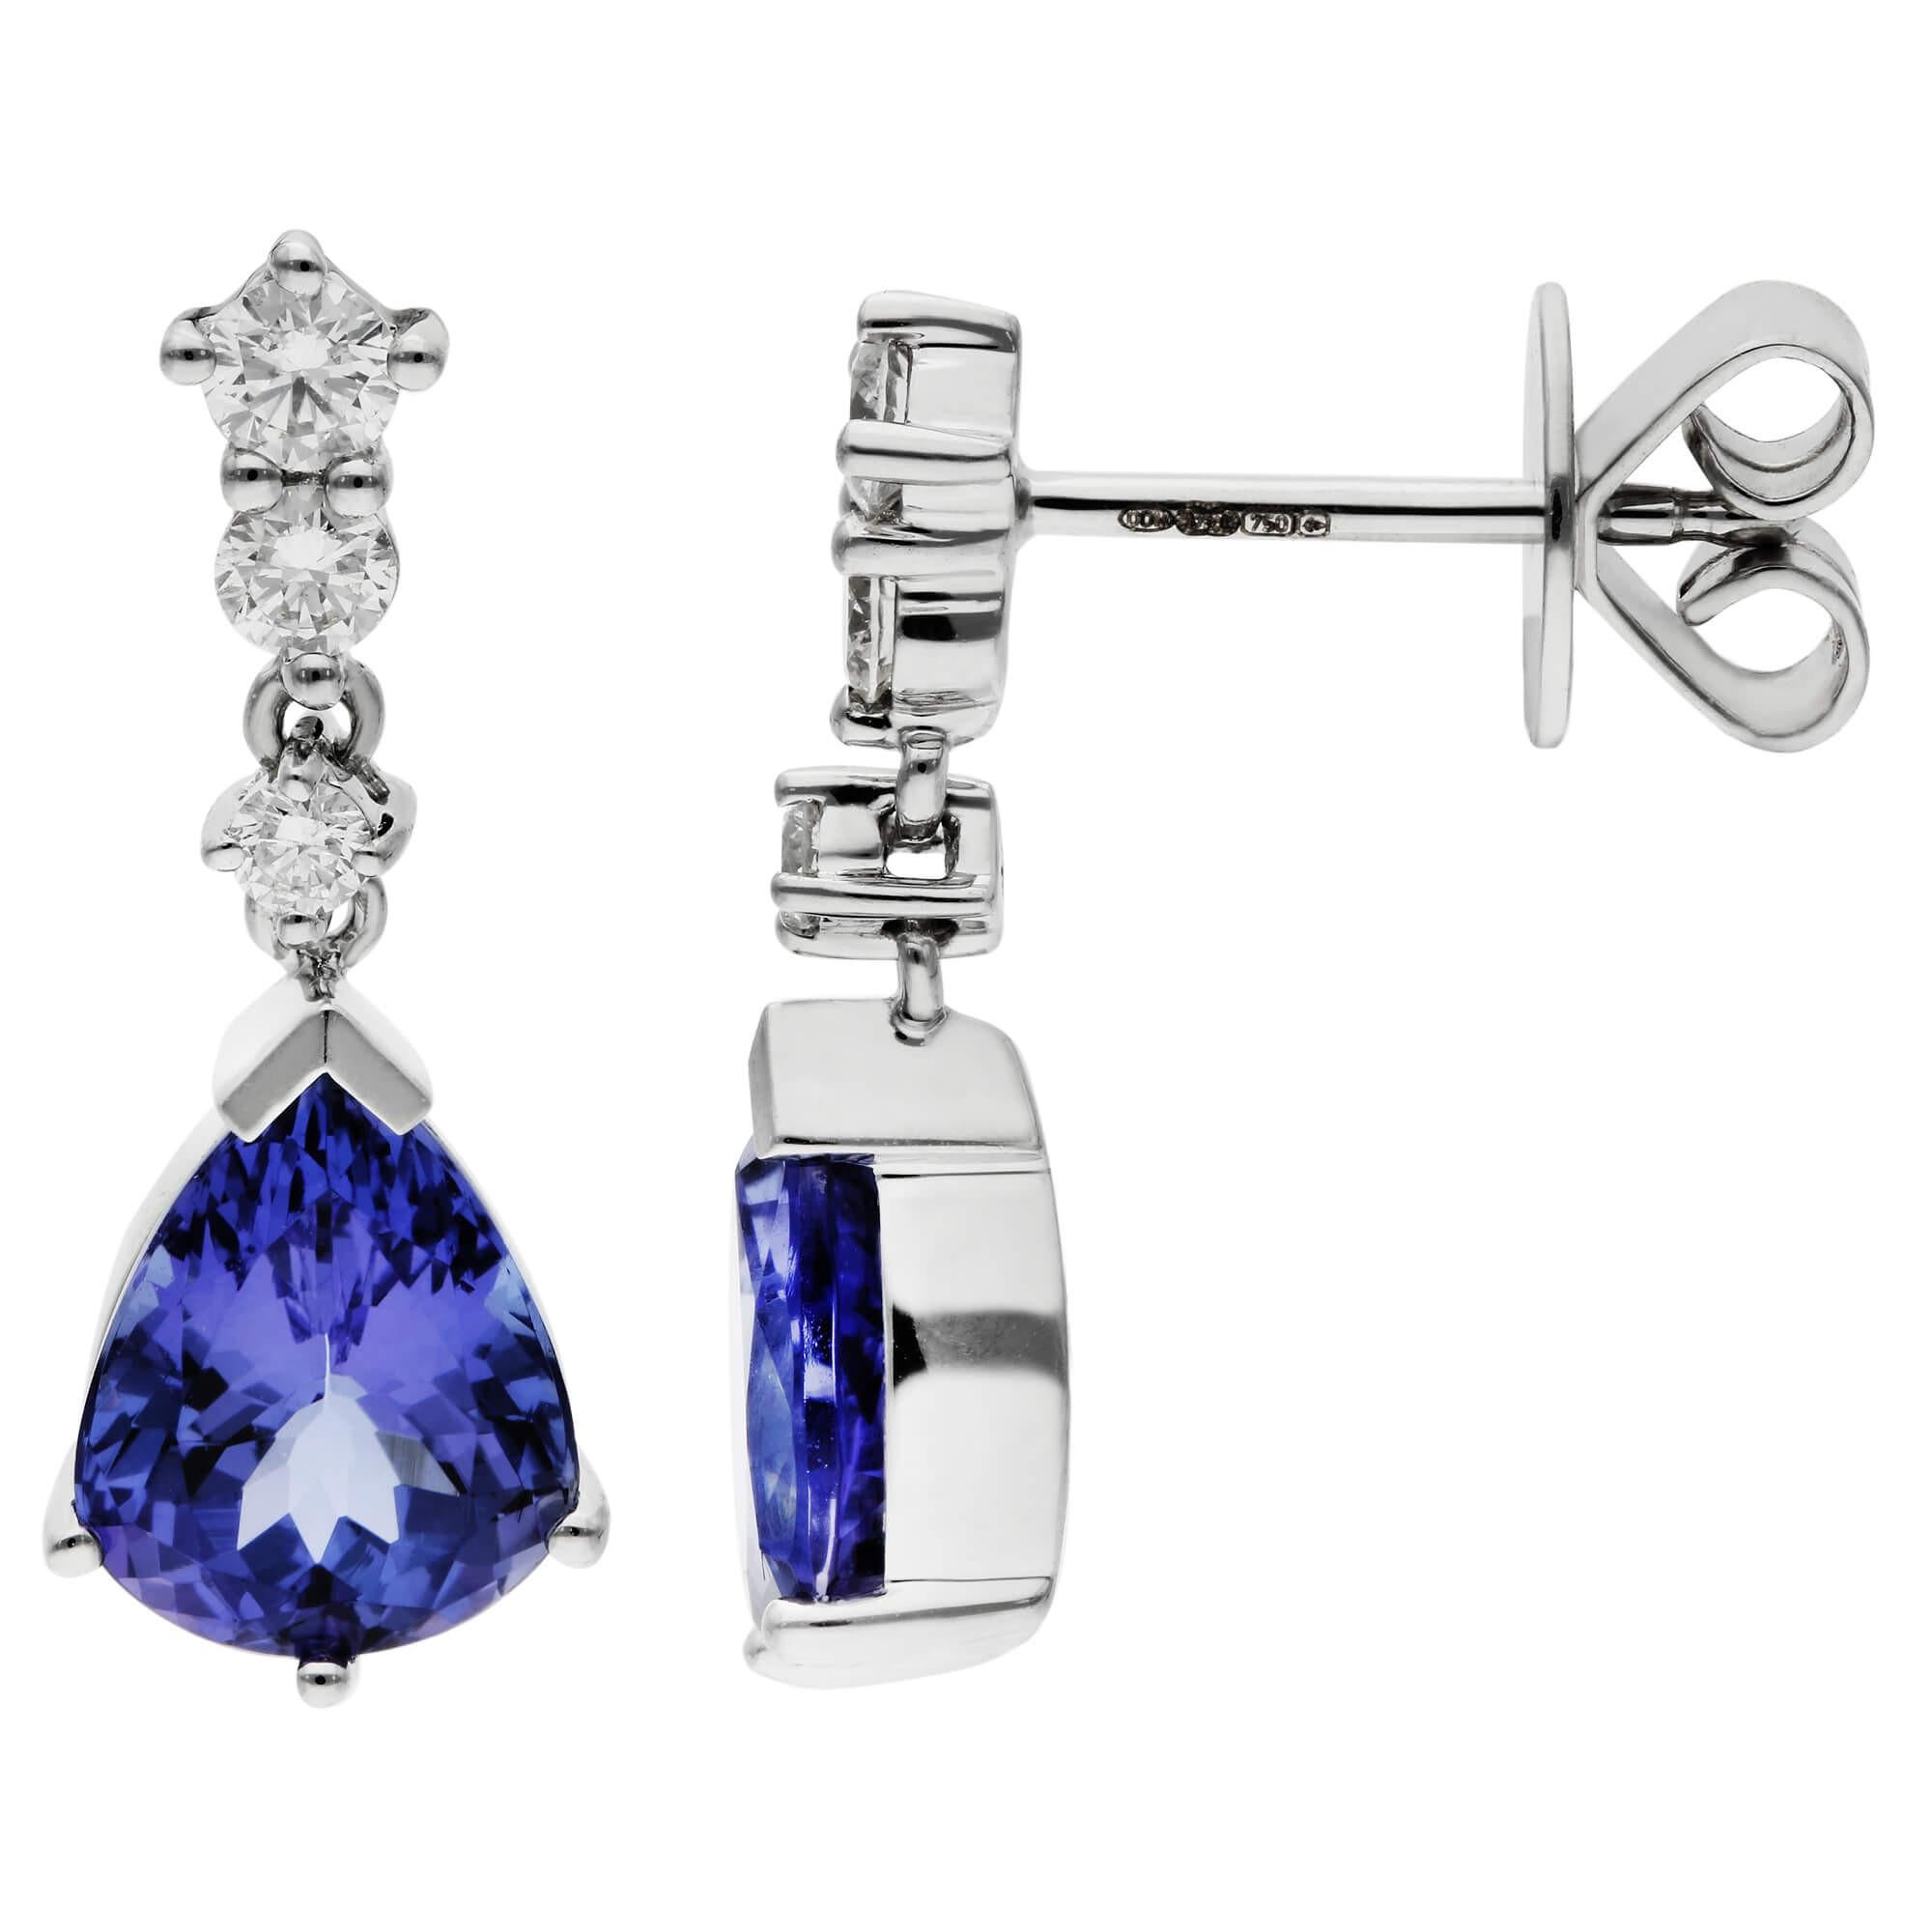 18ct White Gold 1.70ct Tanzanite & 0.37ct Diamond Drop Earrings

Step into a world of captivating elegance with our 18ct White Gold Tanzanite & Diamond Drop Earrings. Each earring is a masterpiece of design, featuring a stunning claw-set pear-shaped